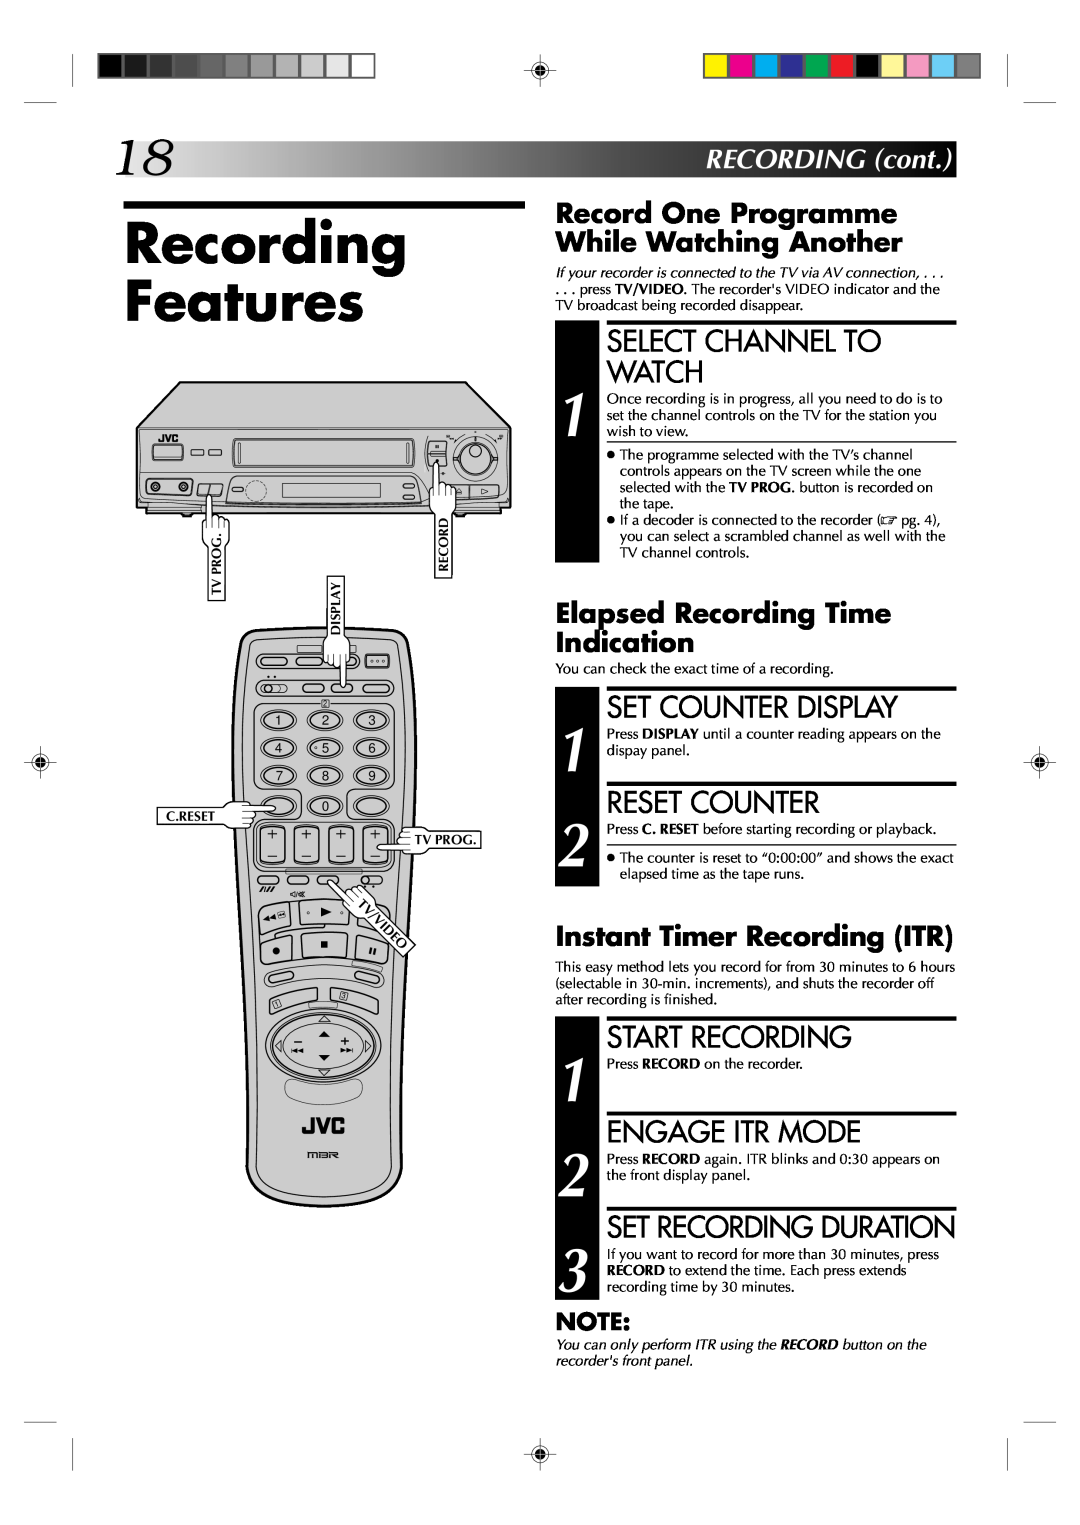 JVC HR-J438E Recording Features, 18RECORDINGcont, Record One Programme While Watching Another, Instant Timer Recording ITR 